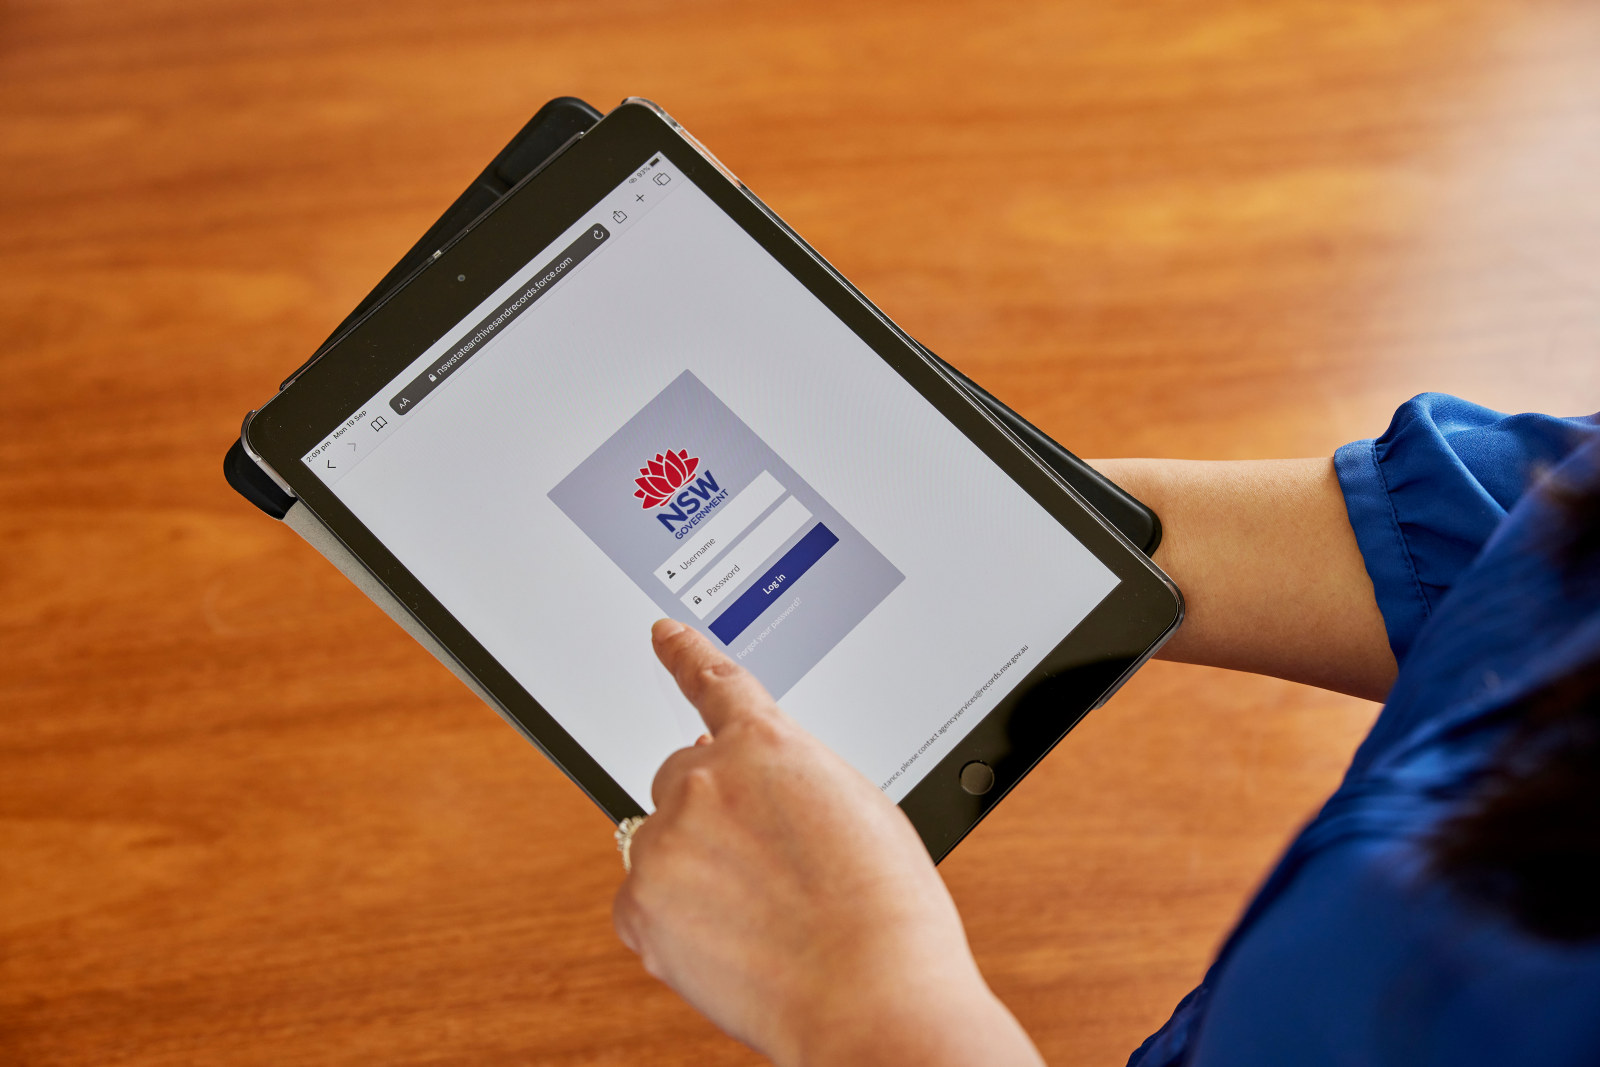 Close up of hand holding an ipad and the homepage for the State Records website